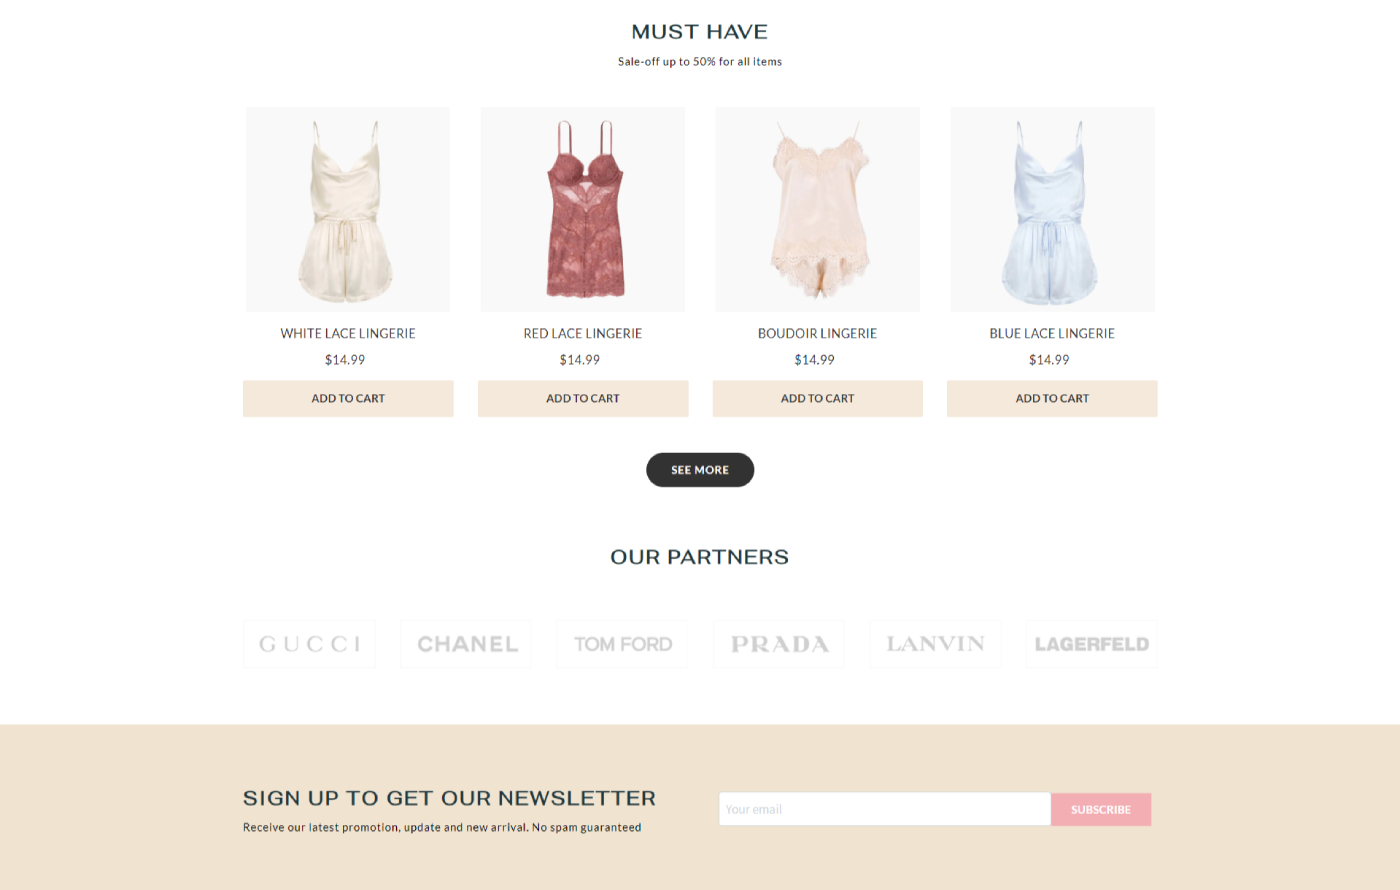 Nightwearify - Lingerie Shopify template built by Pagefly